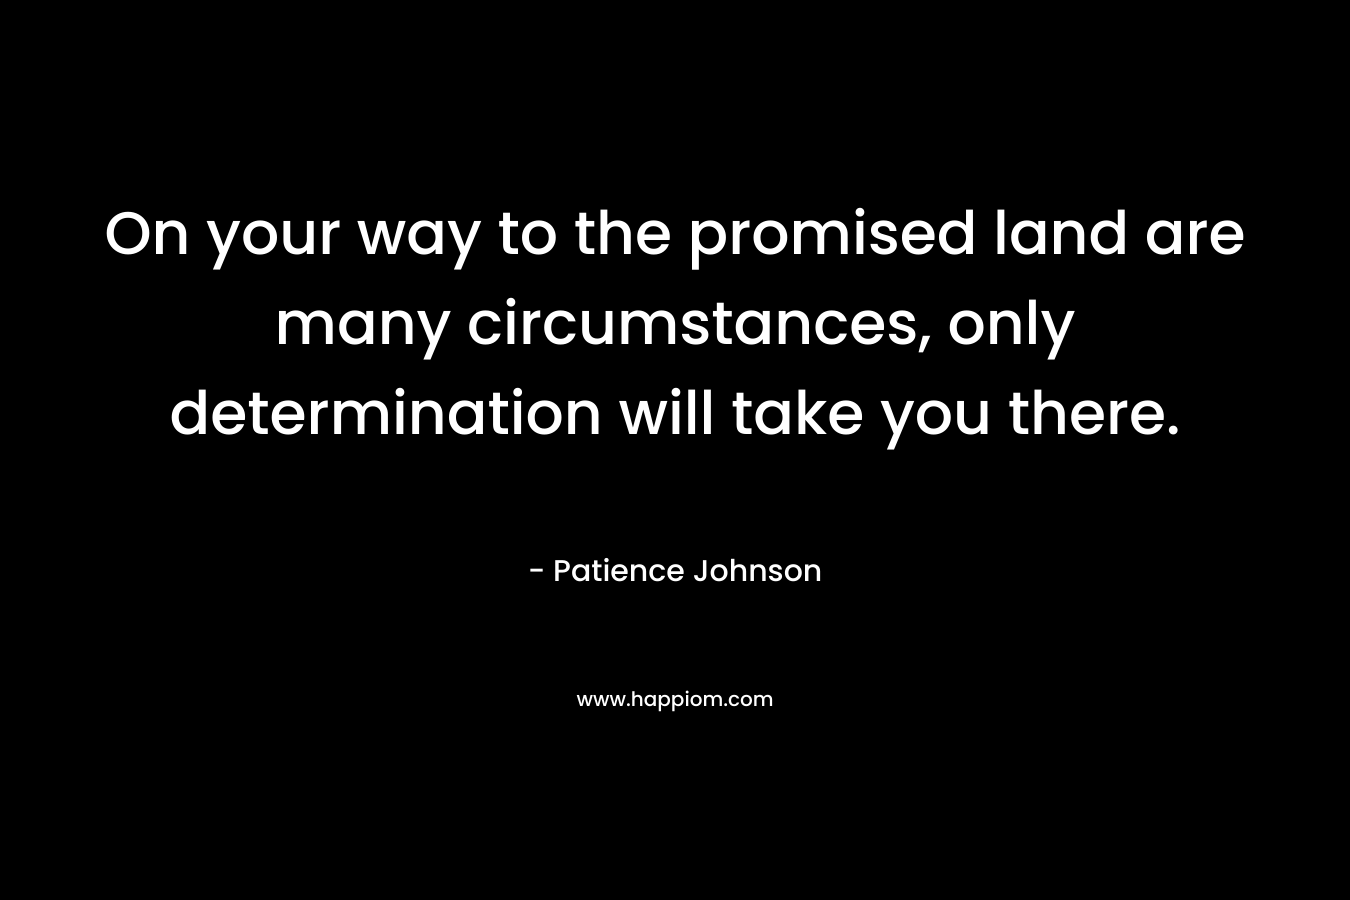 On your way to the promised land are many circumstances, only determination will take you there.